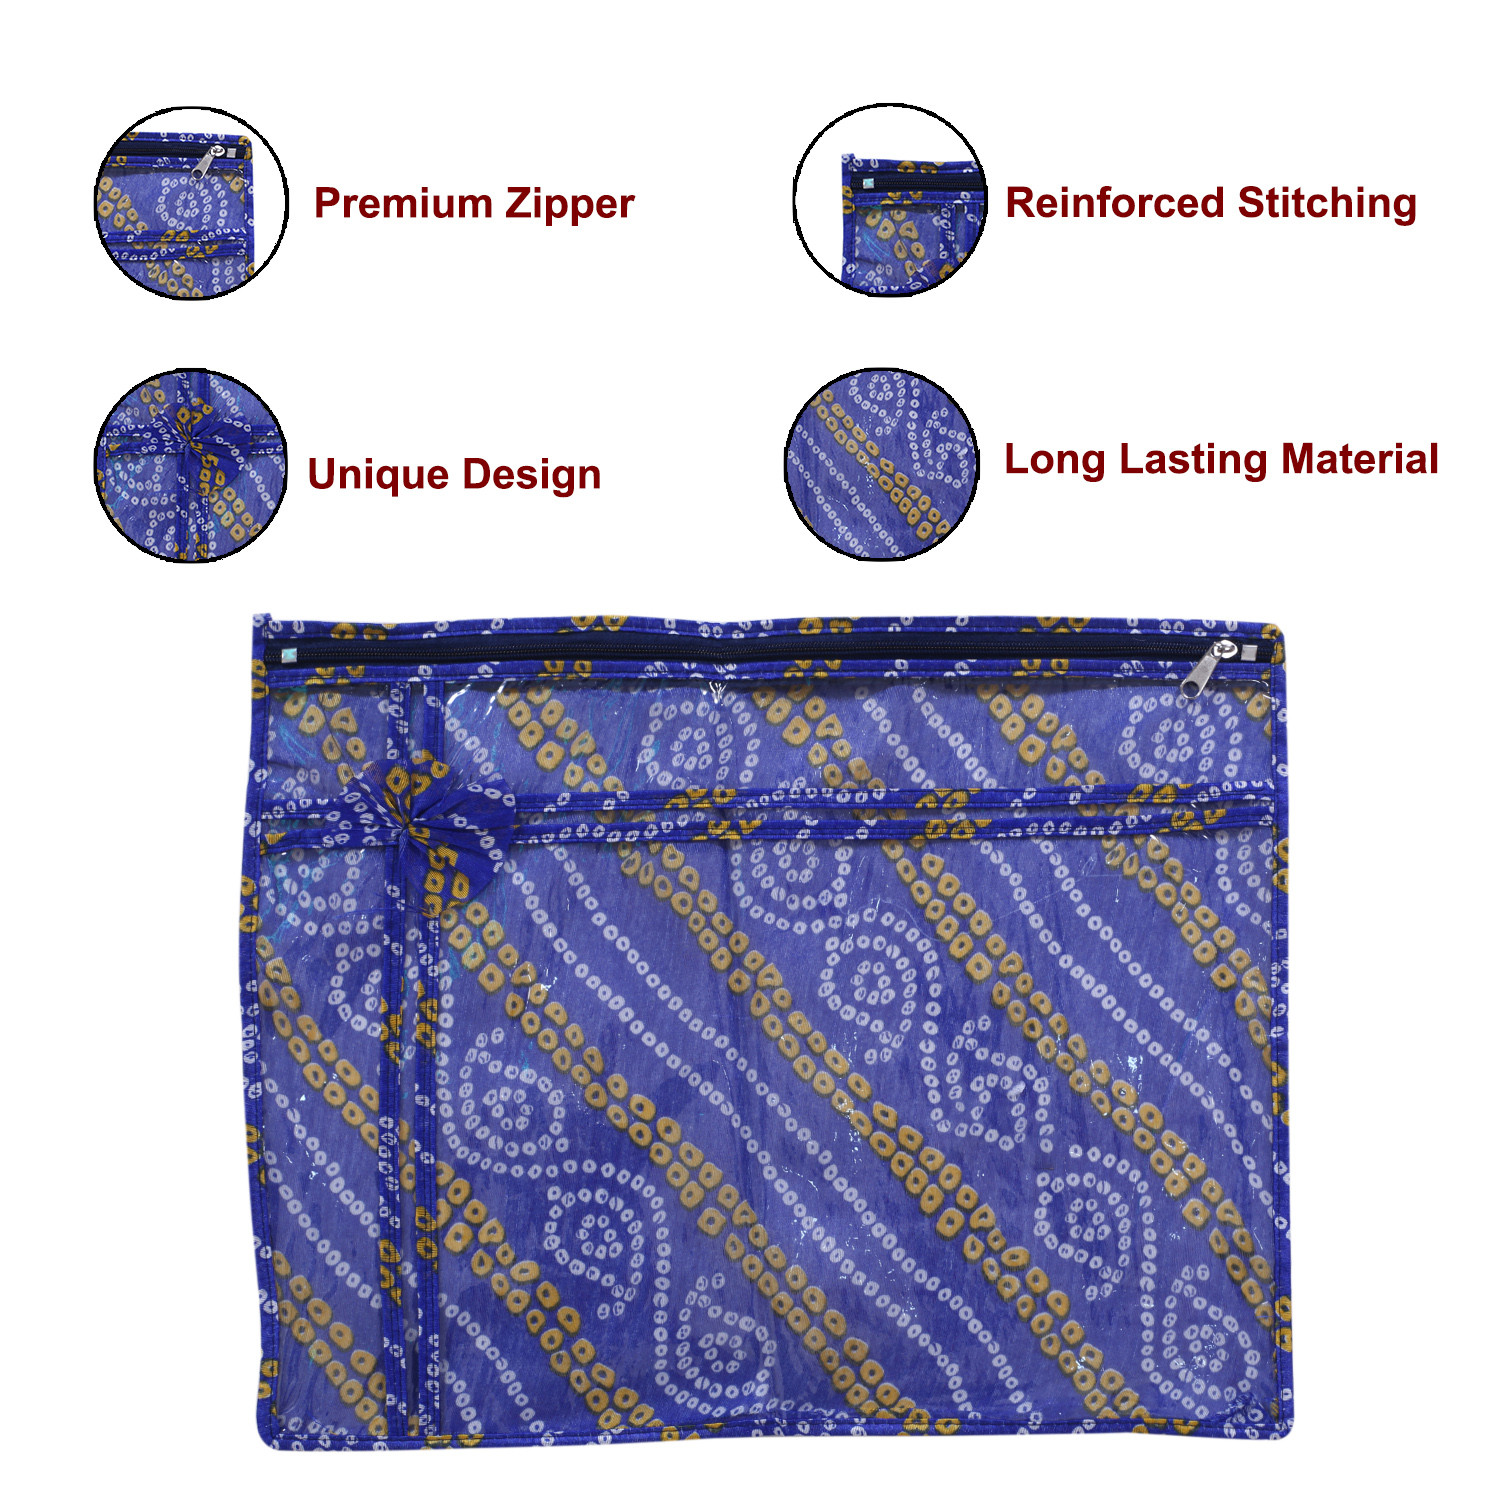 Kuber Industries Bandhani Print PVC Foldable Single Saree Cover|Clothes Storage For Saree, Lehenga, Suit With Transparent Pack of 6 (Blue & Red)